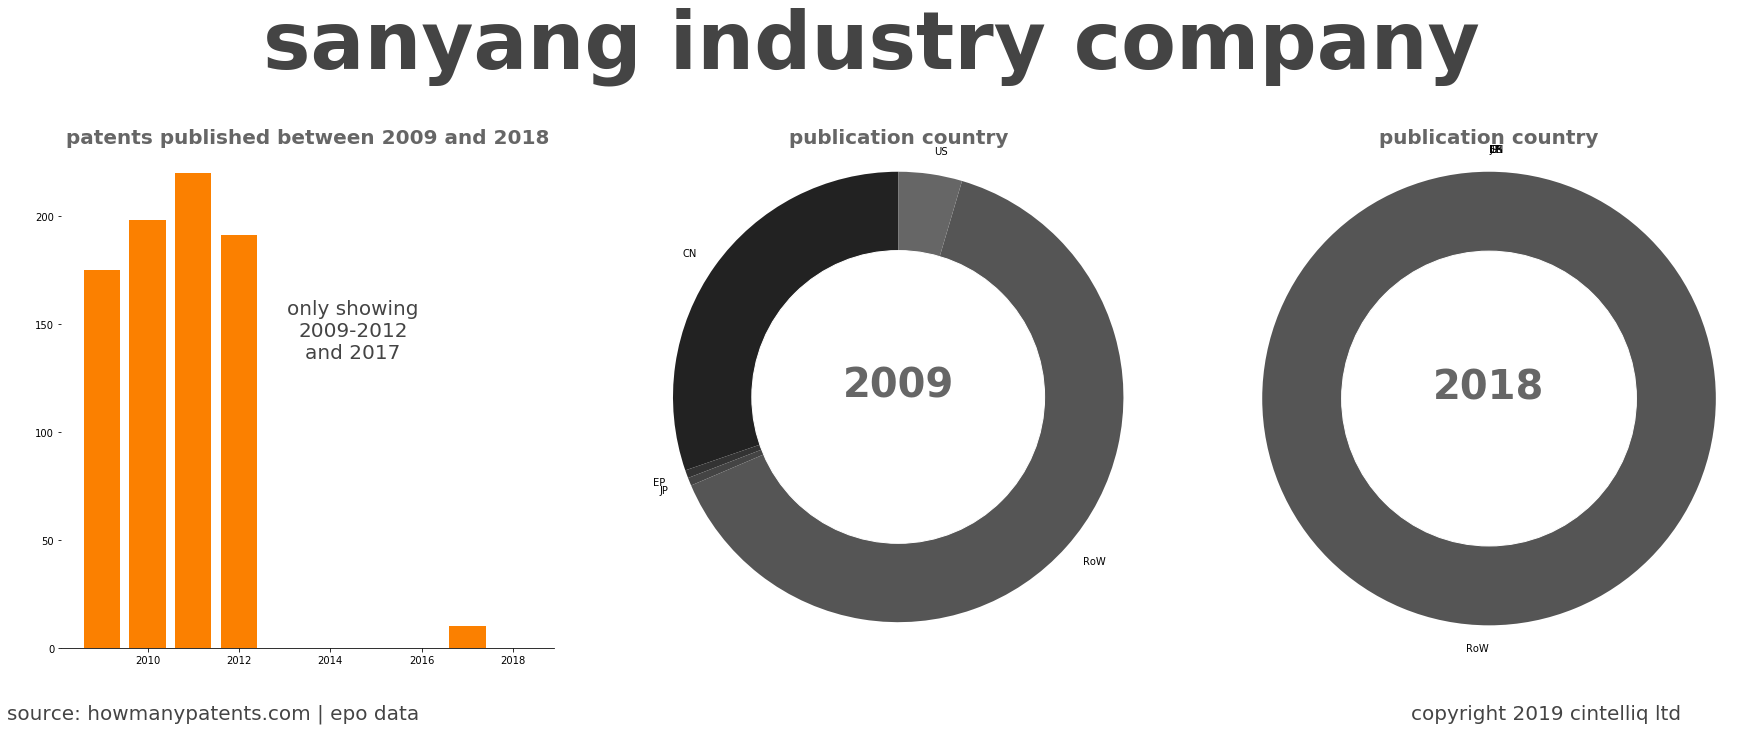 summary of patents for Sanyang Industry Company